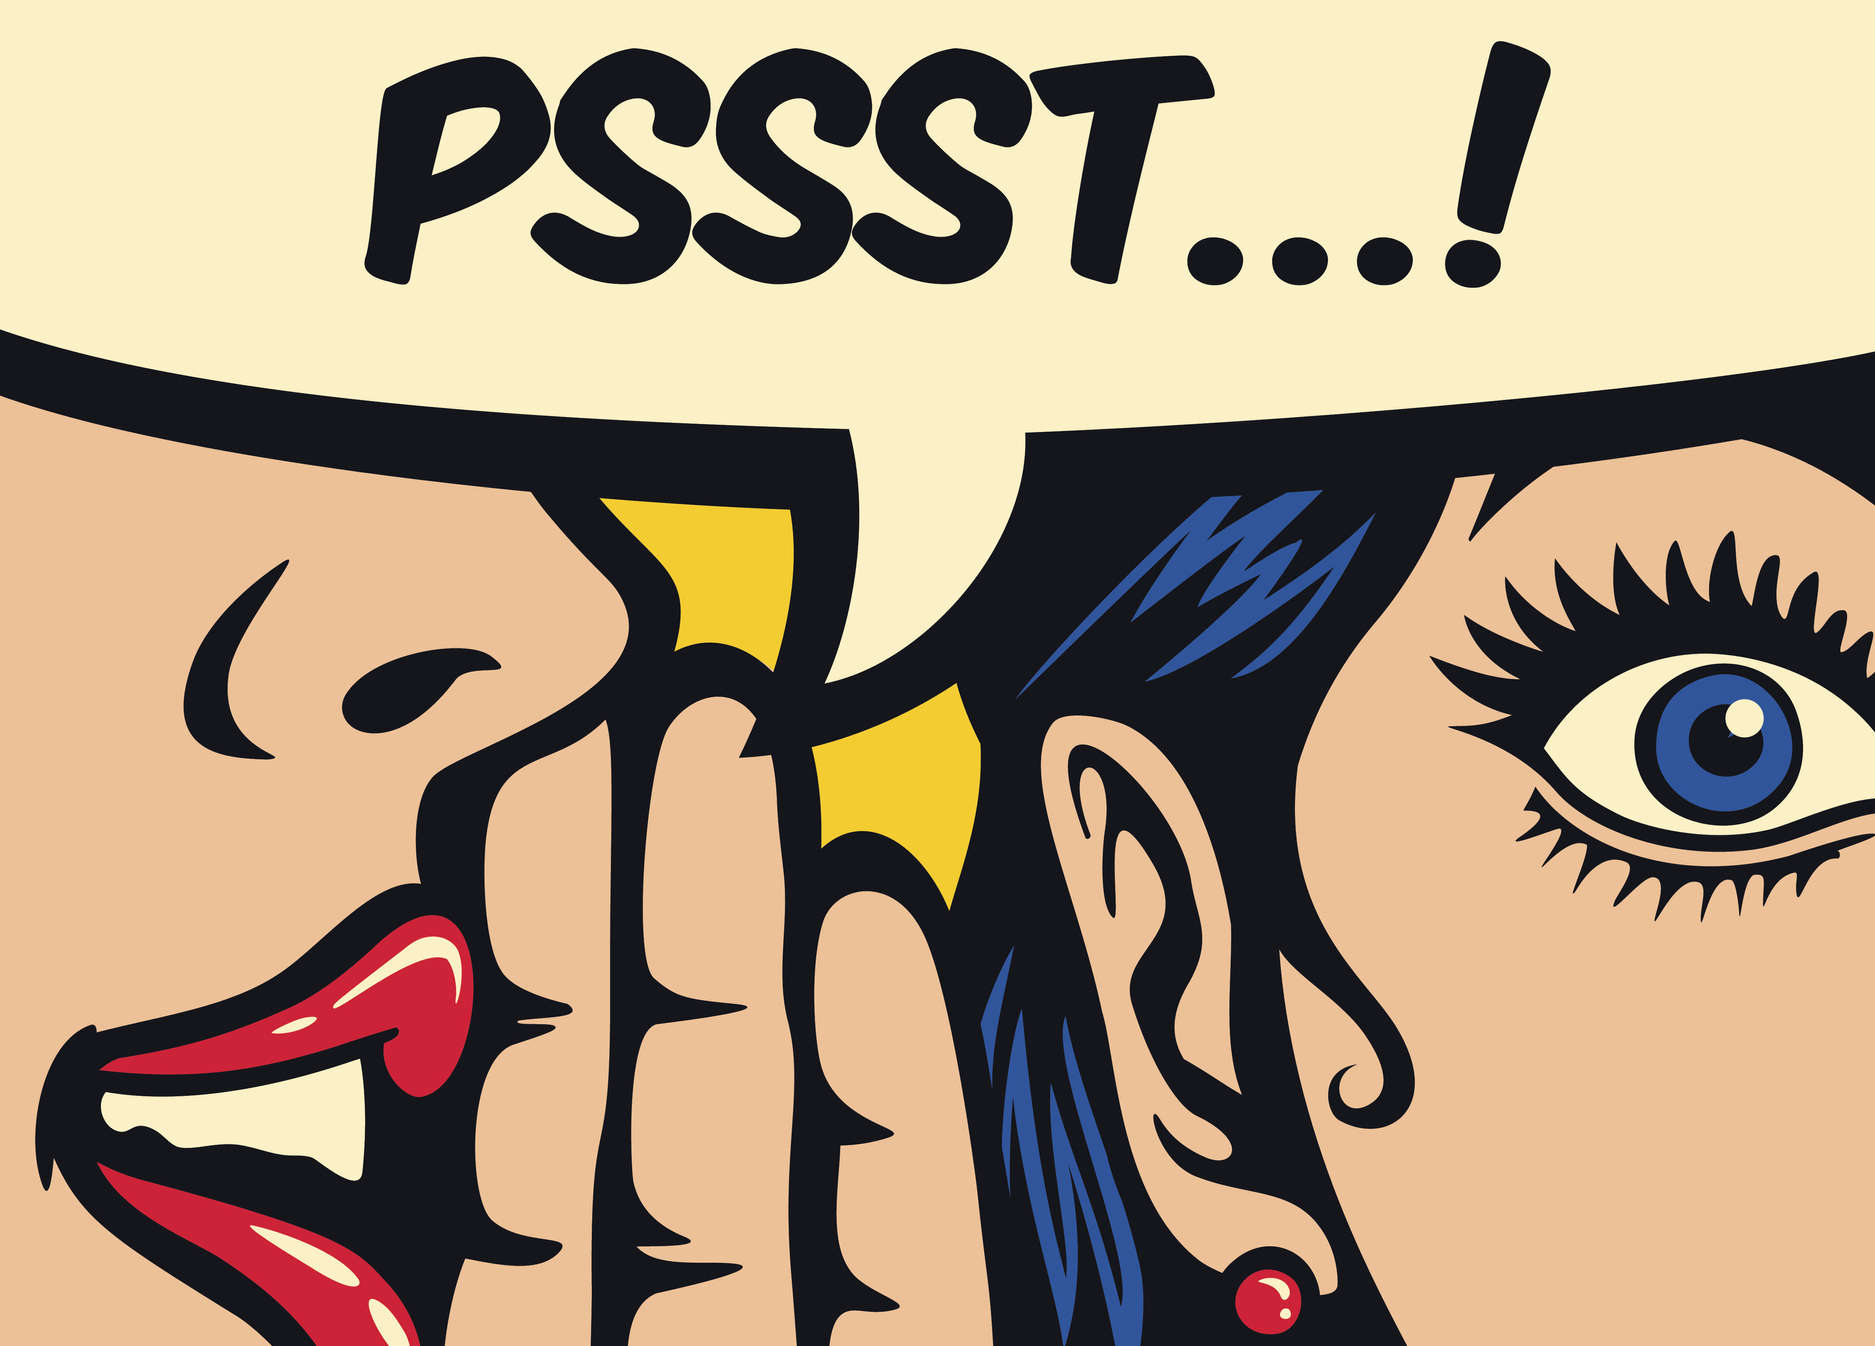 A comic book-style illustration of a woman whispering into another woman's ear with a speech bubble saying PSST! the woman hearing the secret has her eyes wide in shock